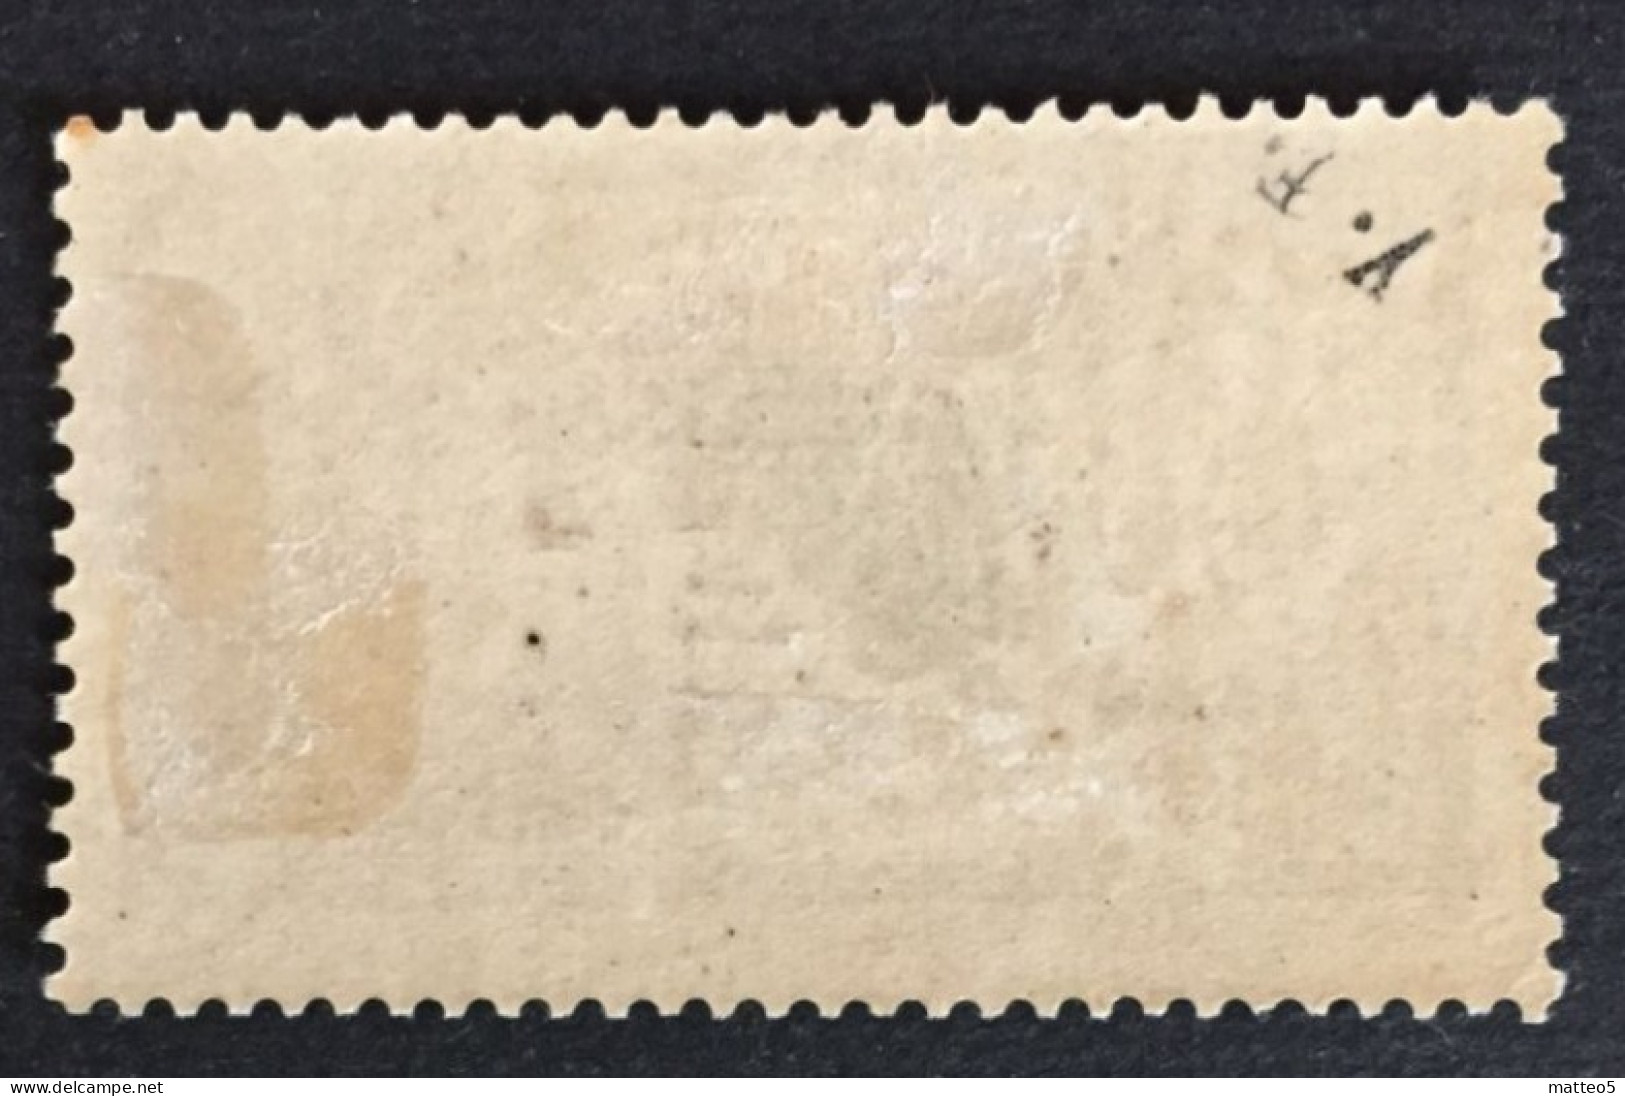 1907 - China French Post Office - Type Merson - Definitives Surcharged New Valve  - Unused - Unused Stamps